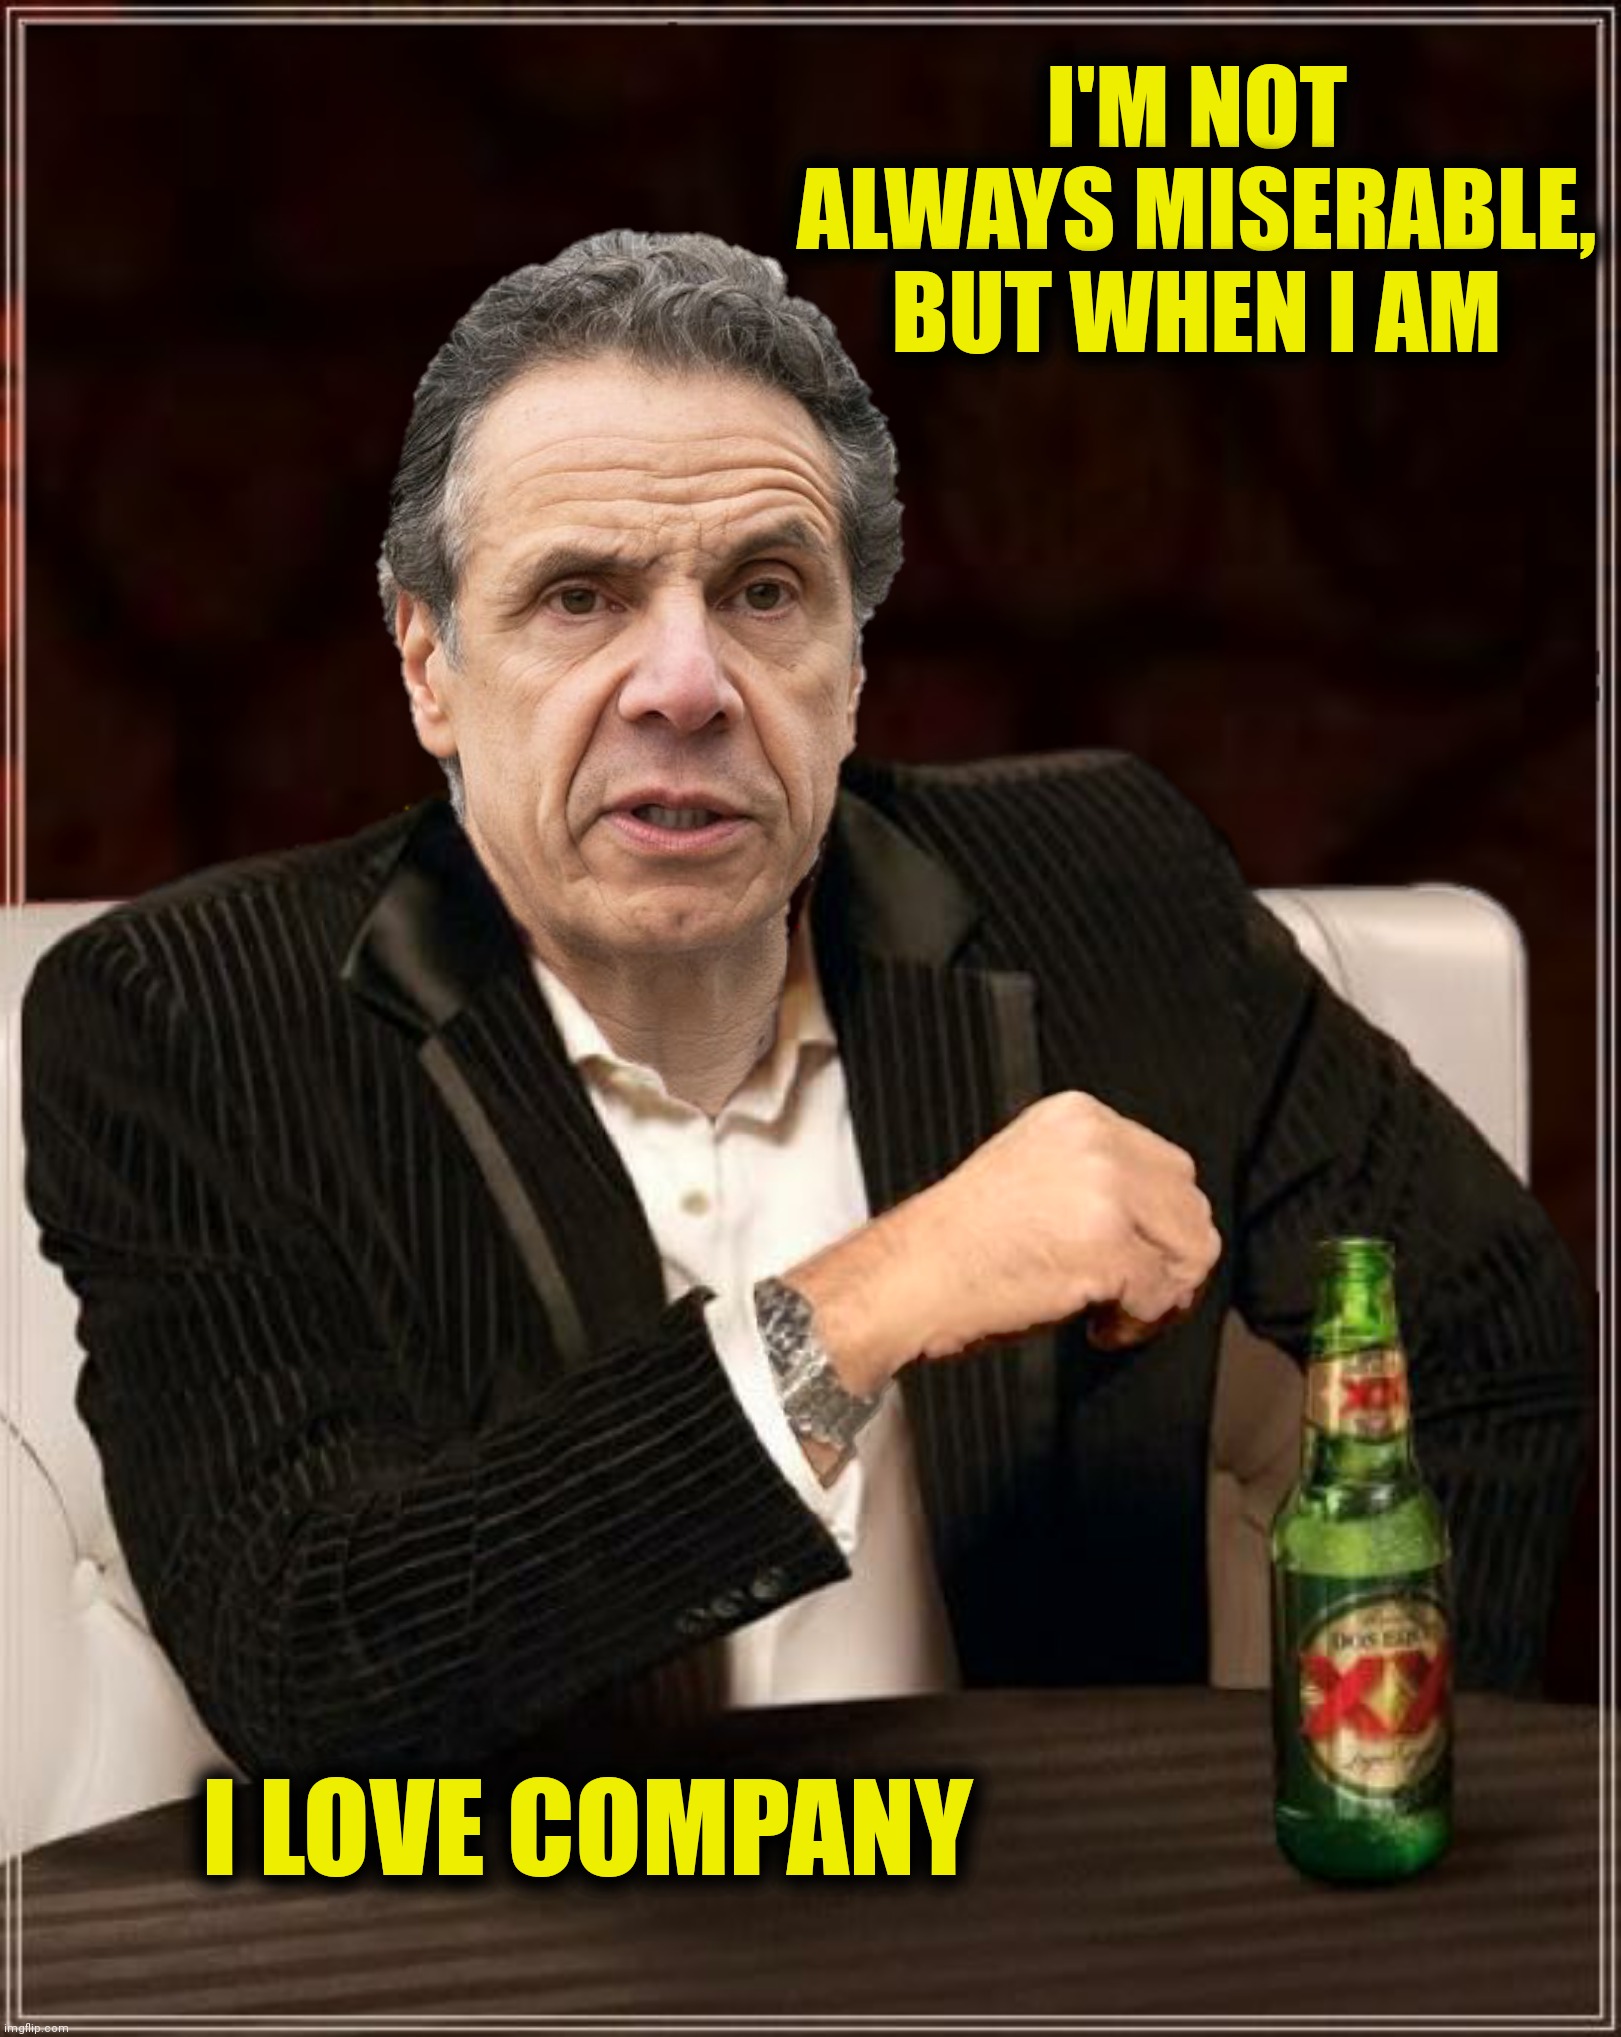 I'M NOT ALWAYS MISERABLE, BUT WHEN I AM I LOVE COMPANY | made w/ Imgflip meme maker